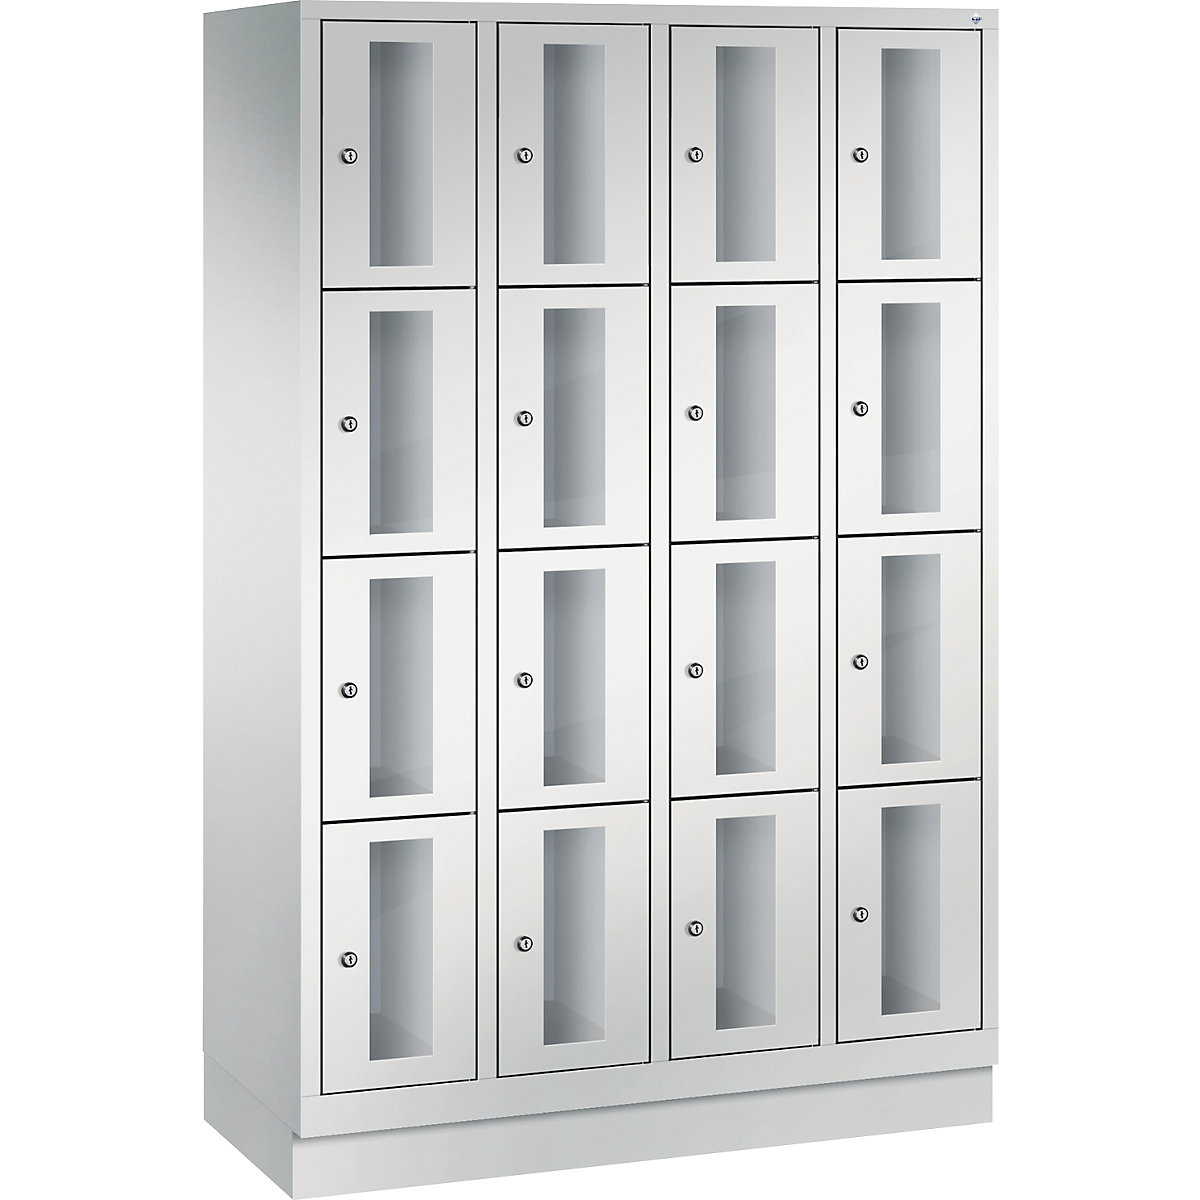 C+P – CLASSIC locker unit, compartment height 375 mm, with plinth, 16 compartments, width 1190 mm, light grey door